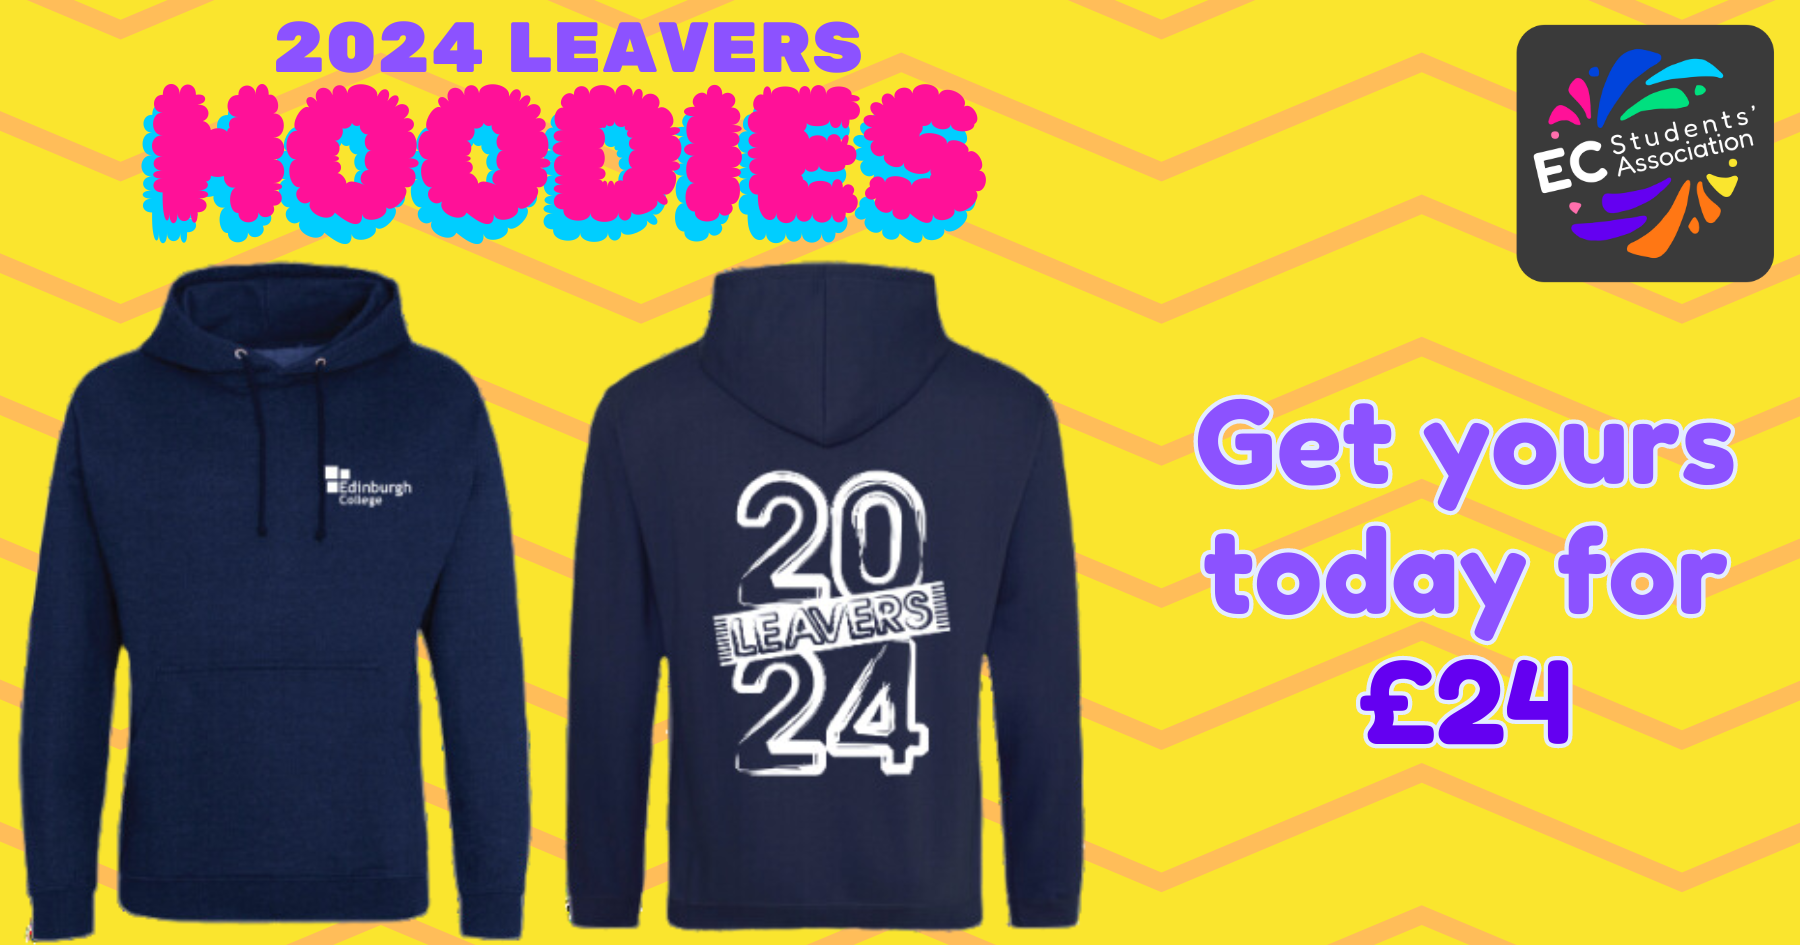 Order your 2024 Leavers hoodie for £24